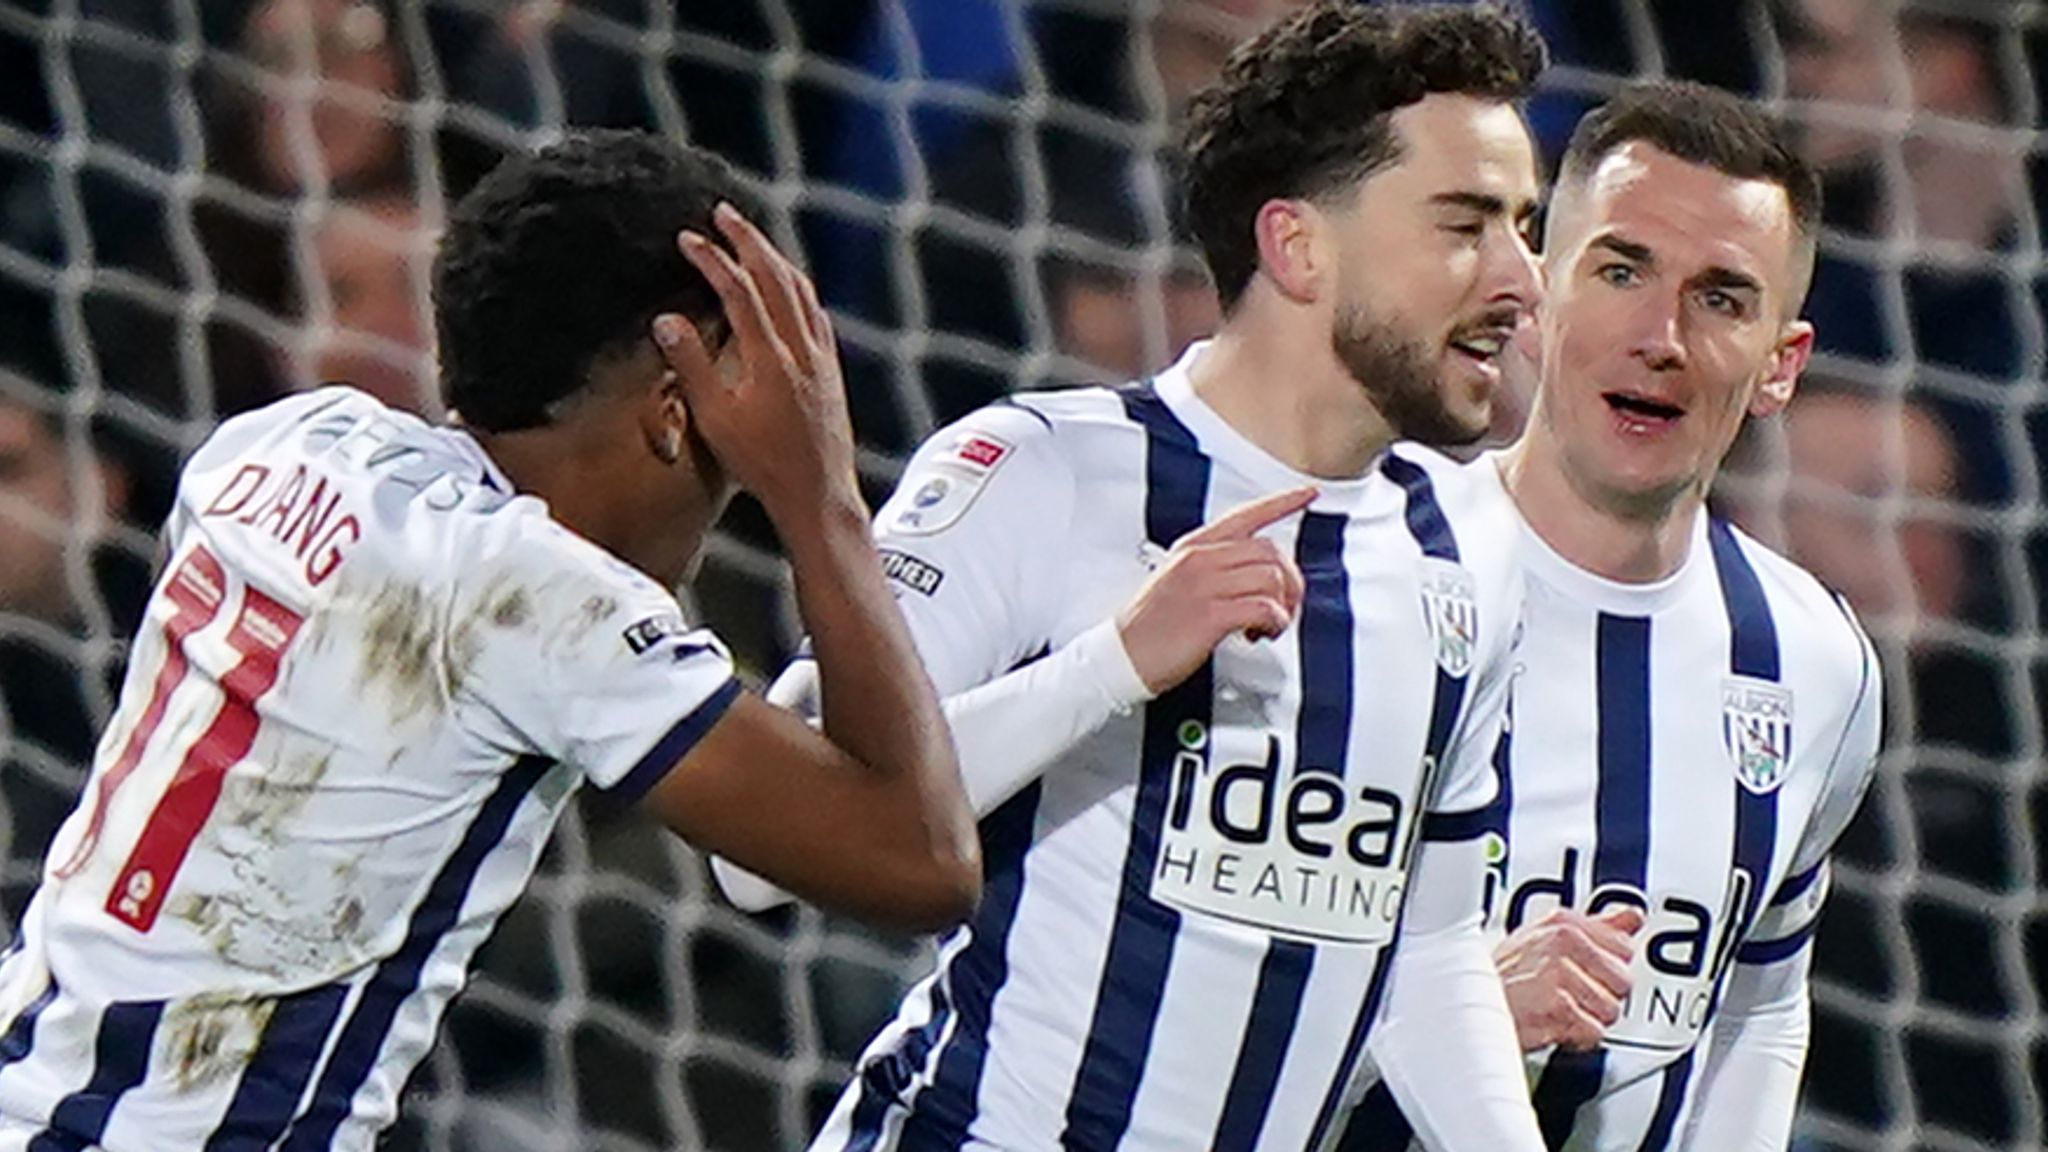 West Bromwich Albion 2-1 Coventry City: Baggies bolster play-off